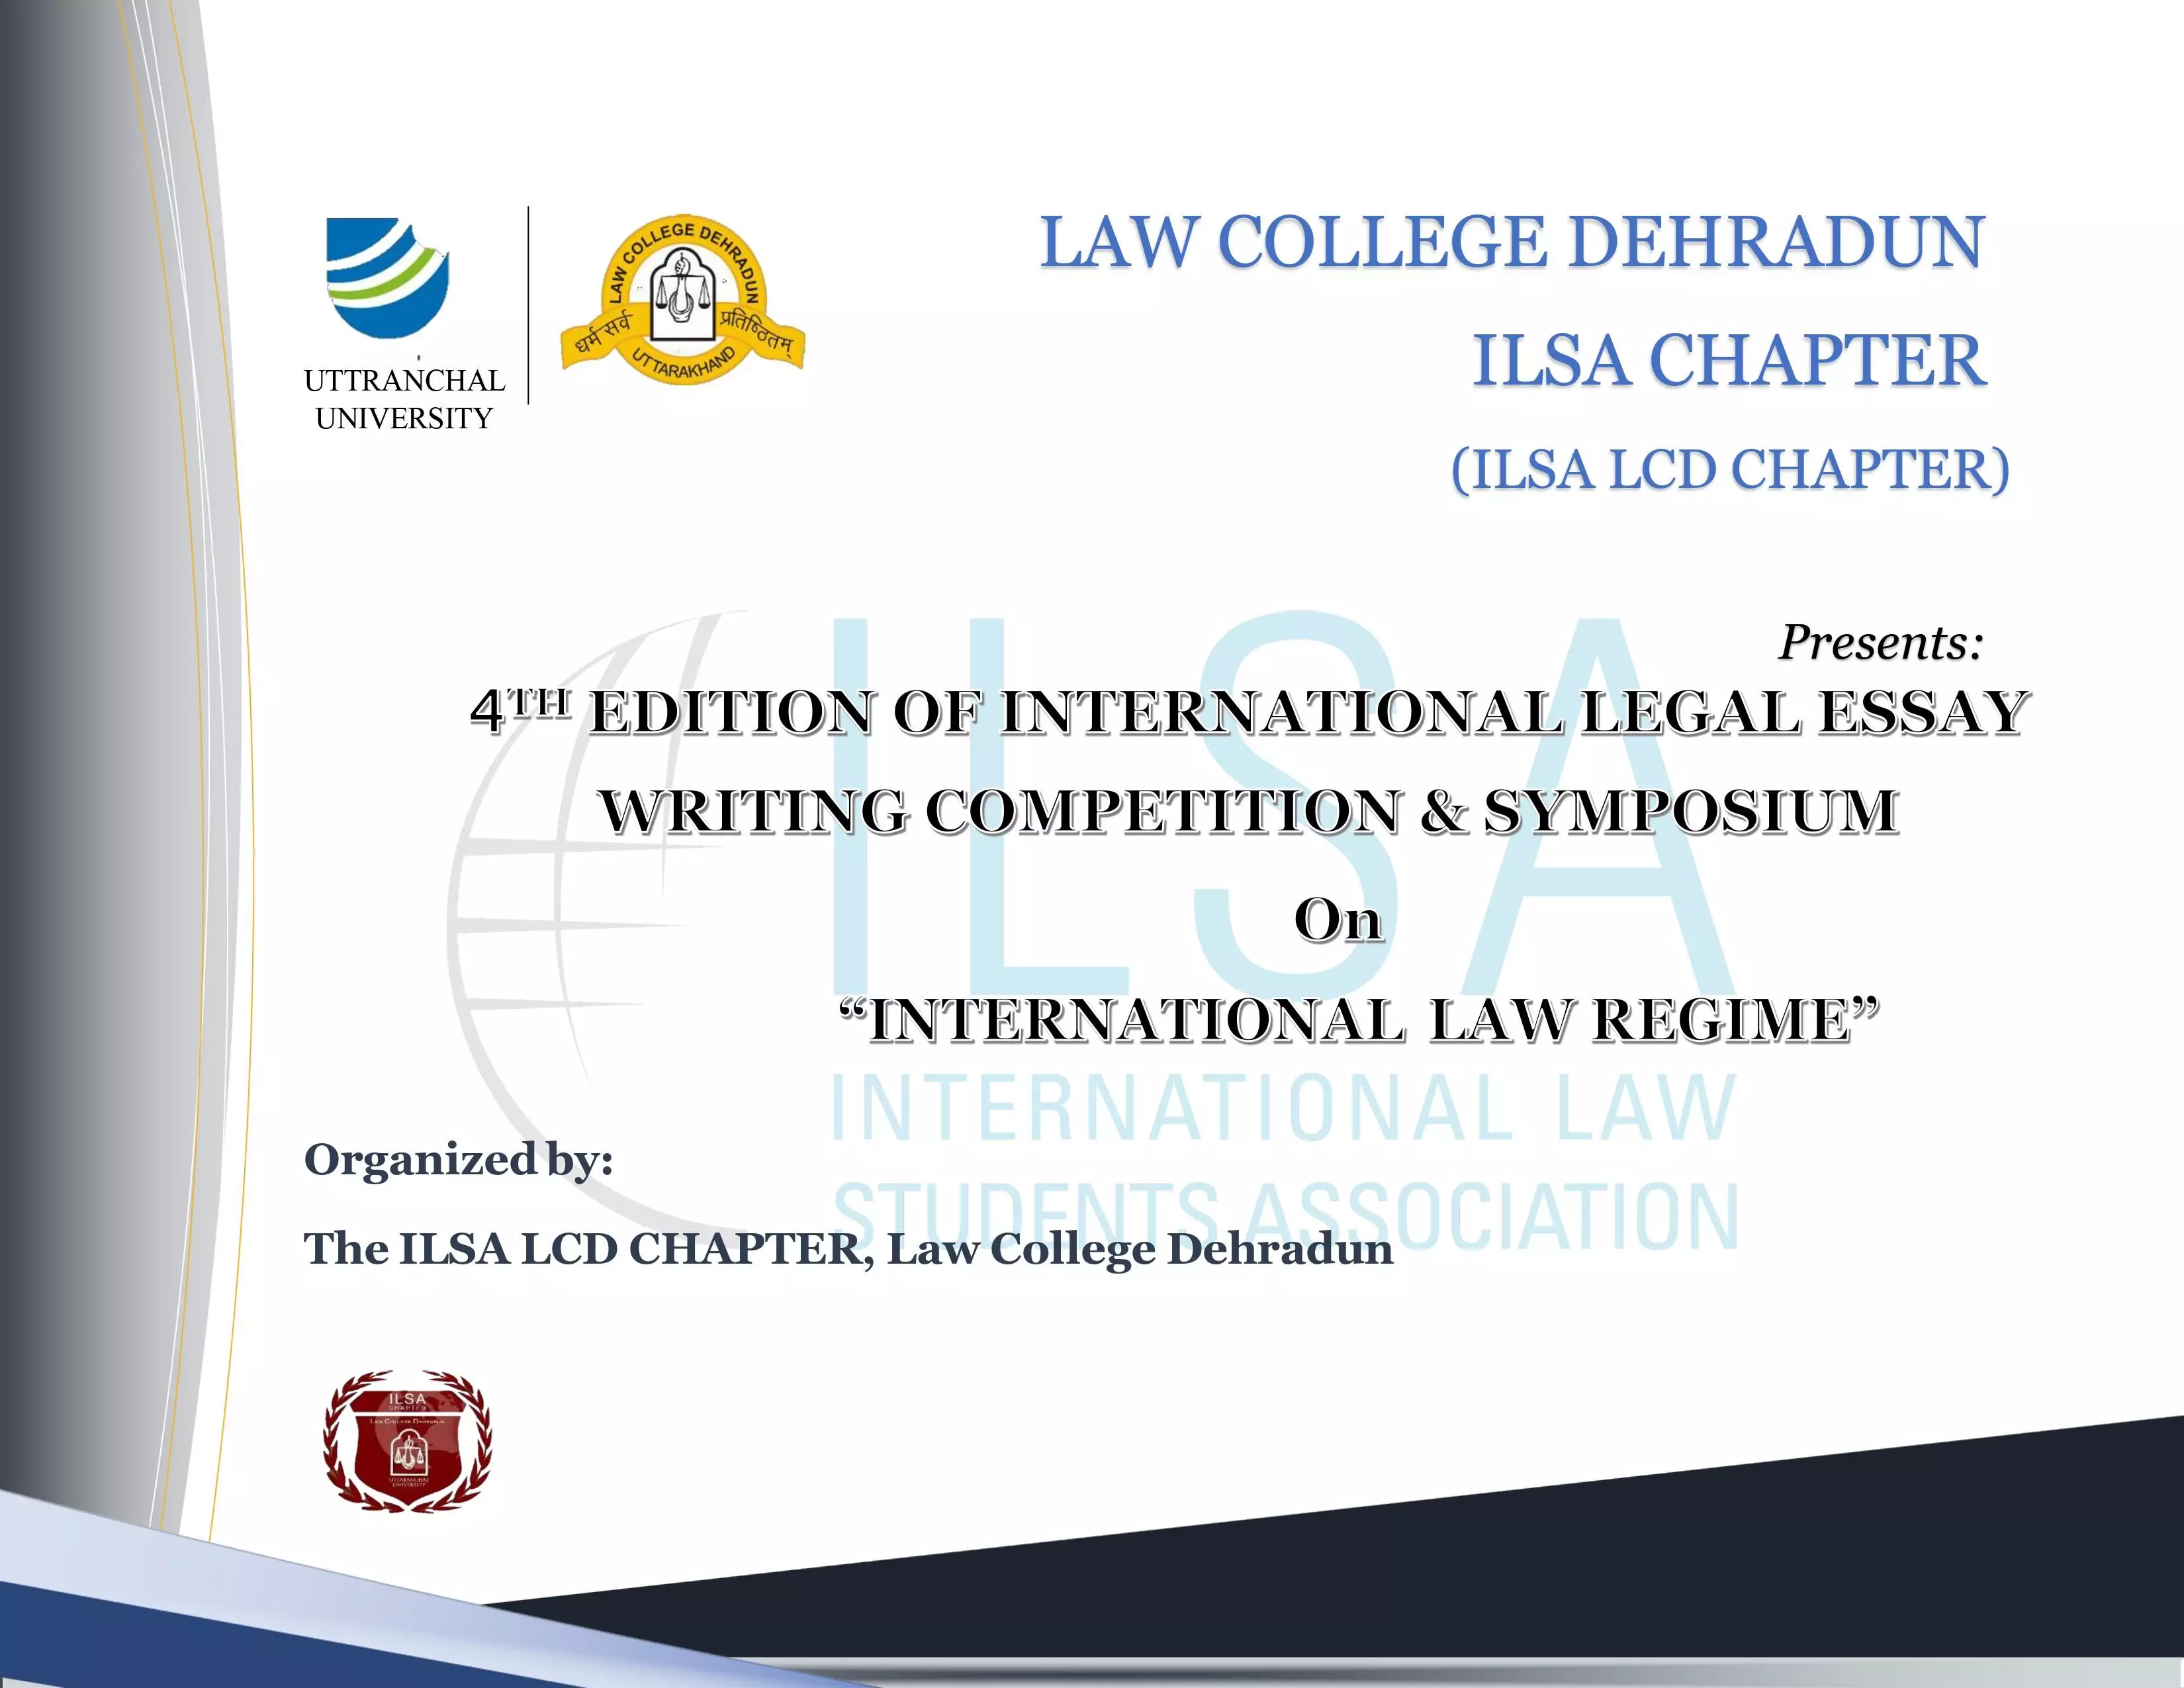 4th International Legal Essay Writing Competition and Symposium - International Law Regime | ILSA LCD Chapter